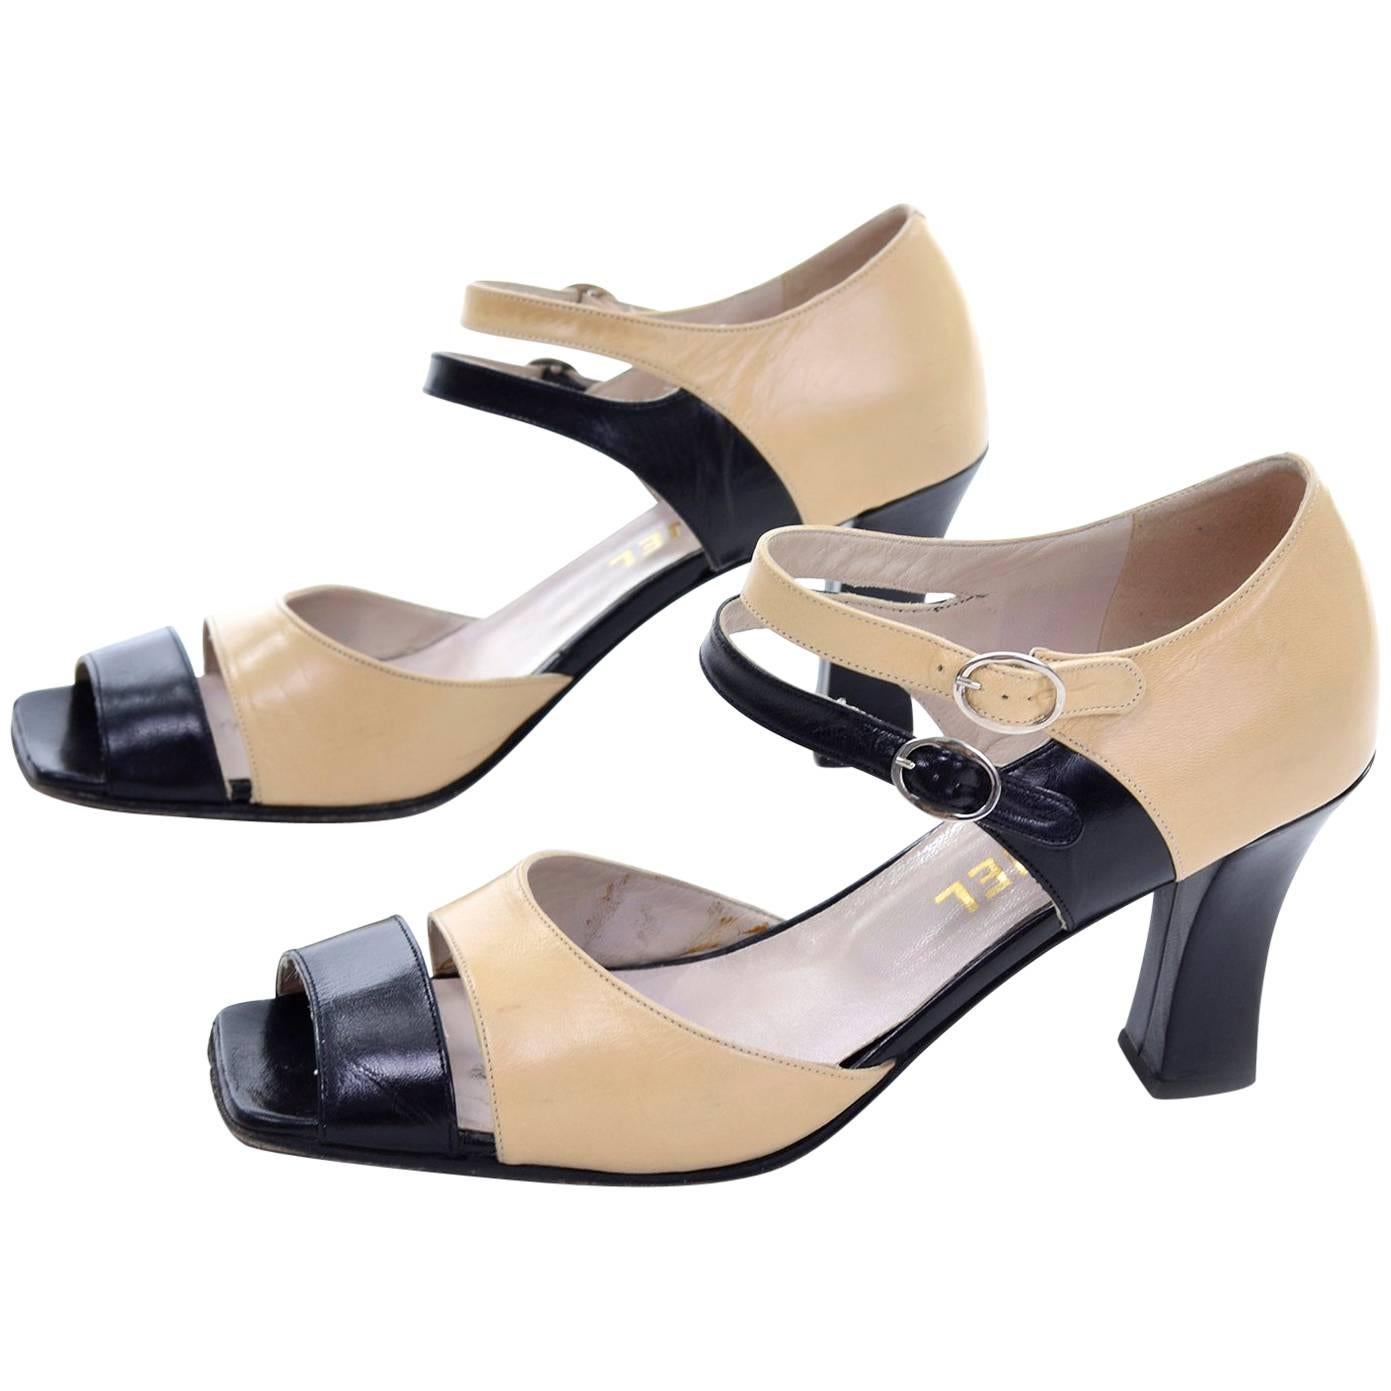 Chanel Vintage Peep Toe Double Strap Two Tone Beige and Black Shoes 37.5